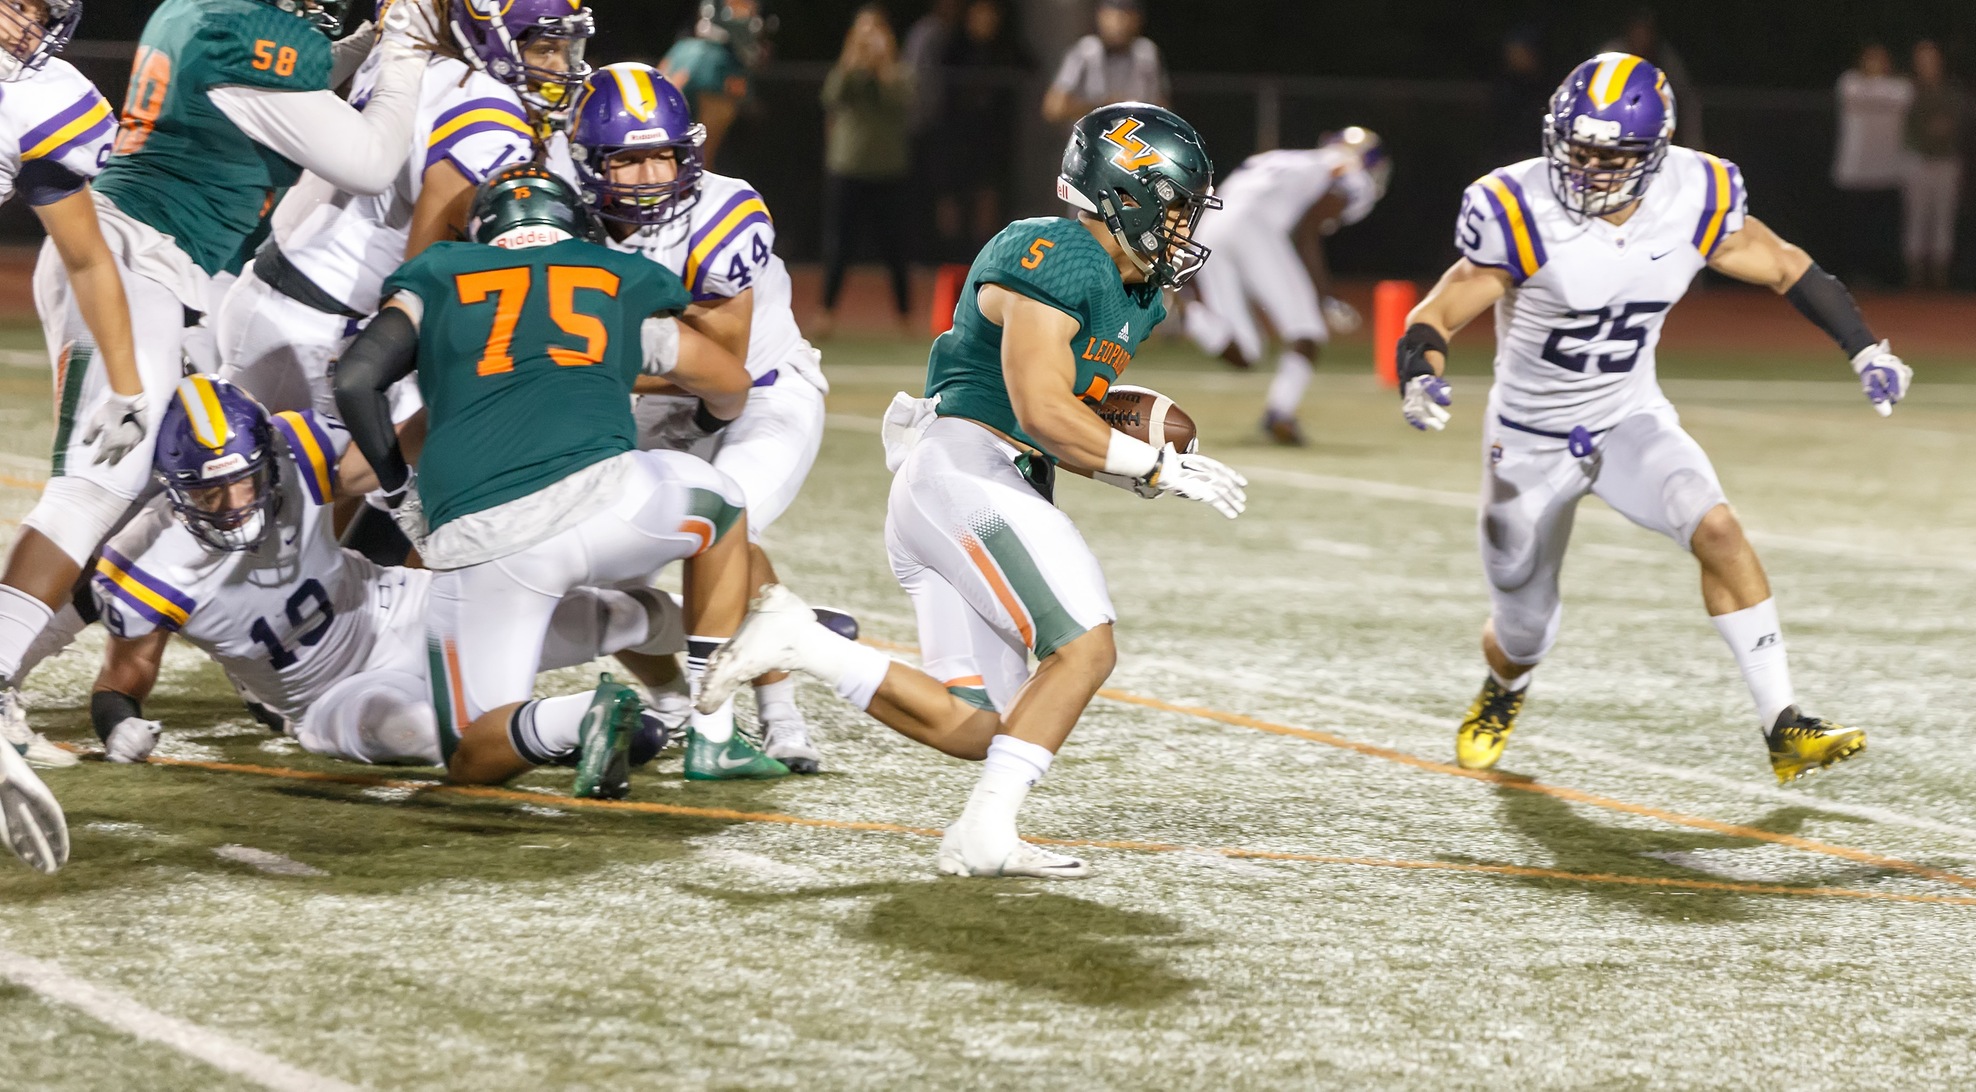 Stags edge Leopards on Homecoming